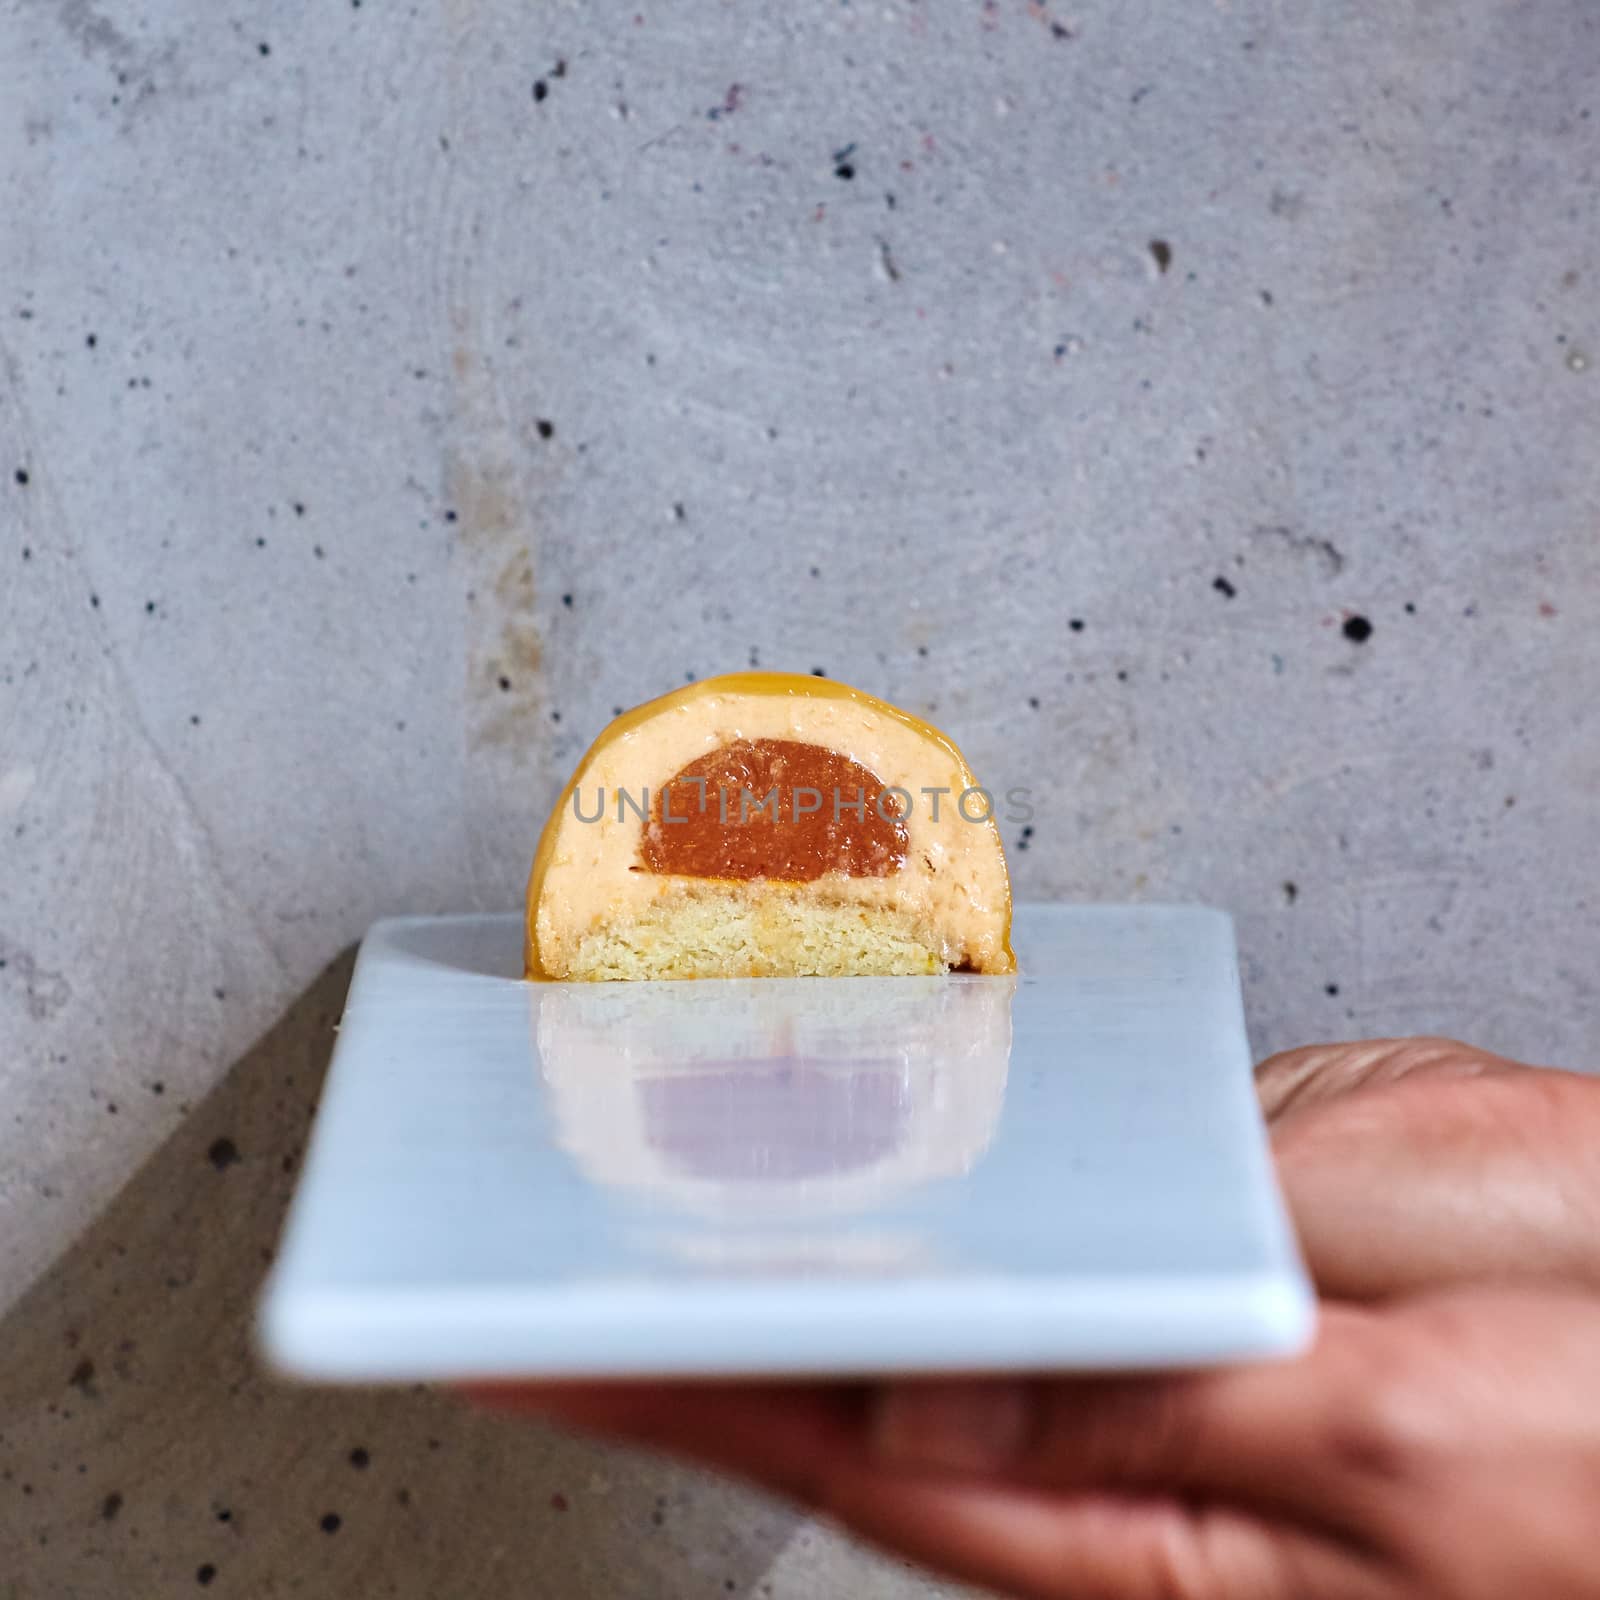 Dessert in a hand on a concrete background